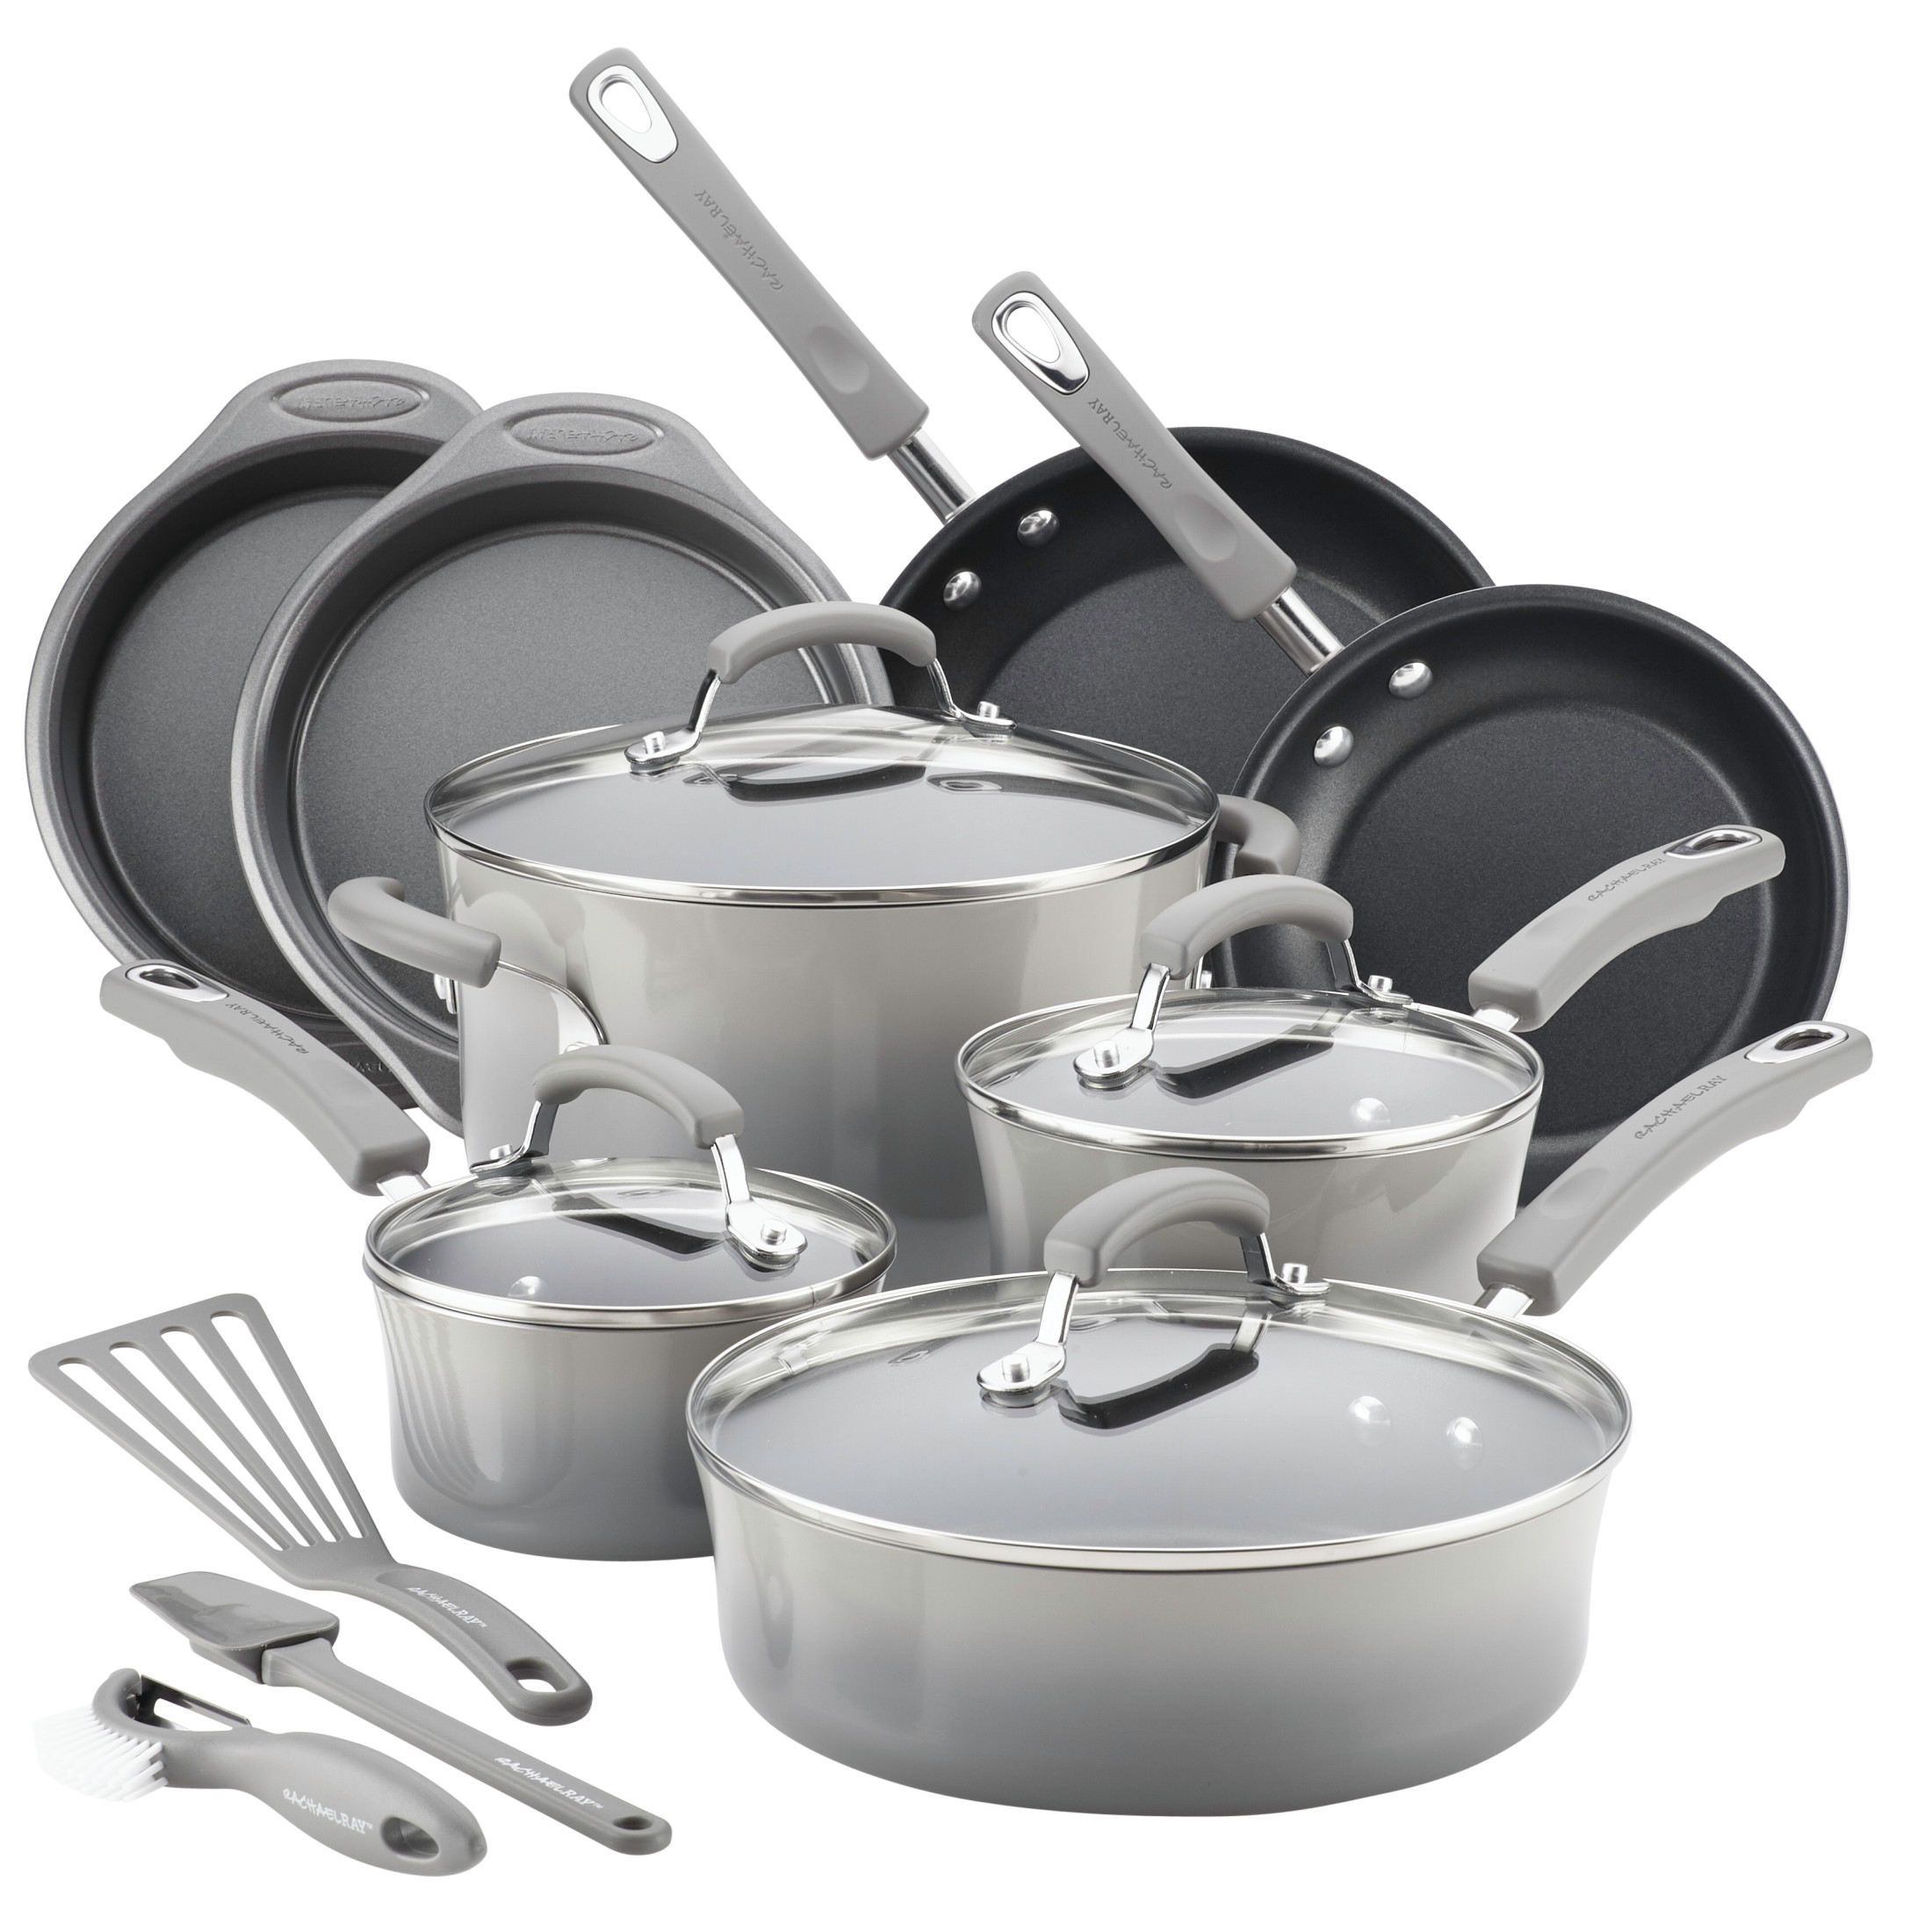 Rachael Ray 15 Piece Hard Enamel Nonstick Pots and Pans Set, Gray - image 1 of 15